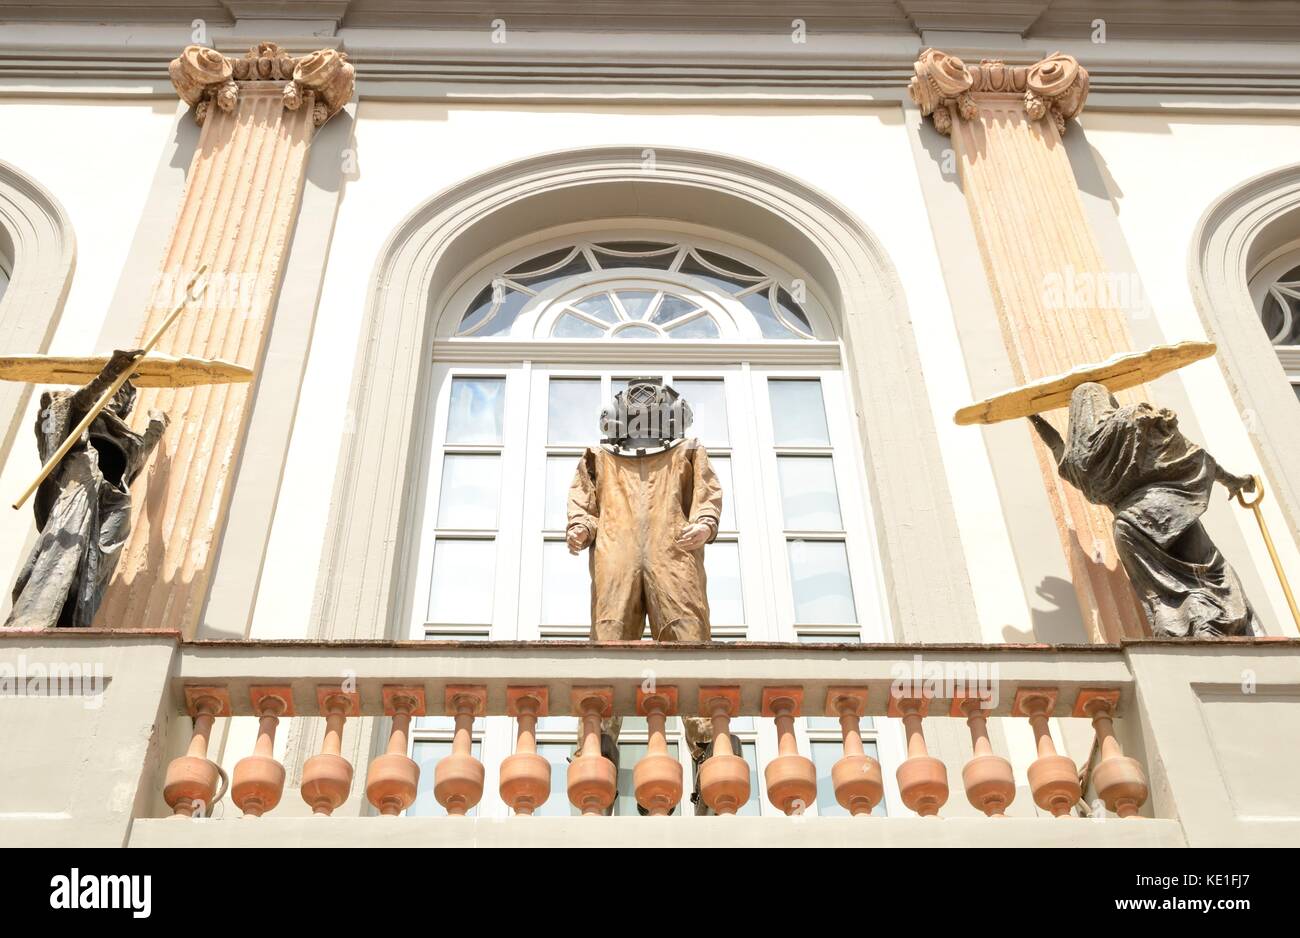 Surrealist sculptures on balcony at the Dali Theater and Museum in Figueres, a city of Girona, Catalonia, Spain. Stock Photo